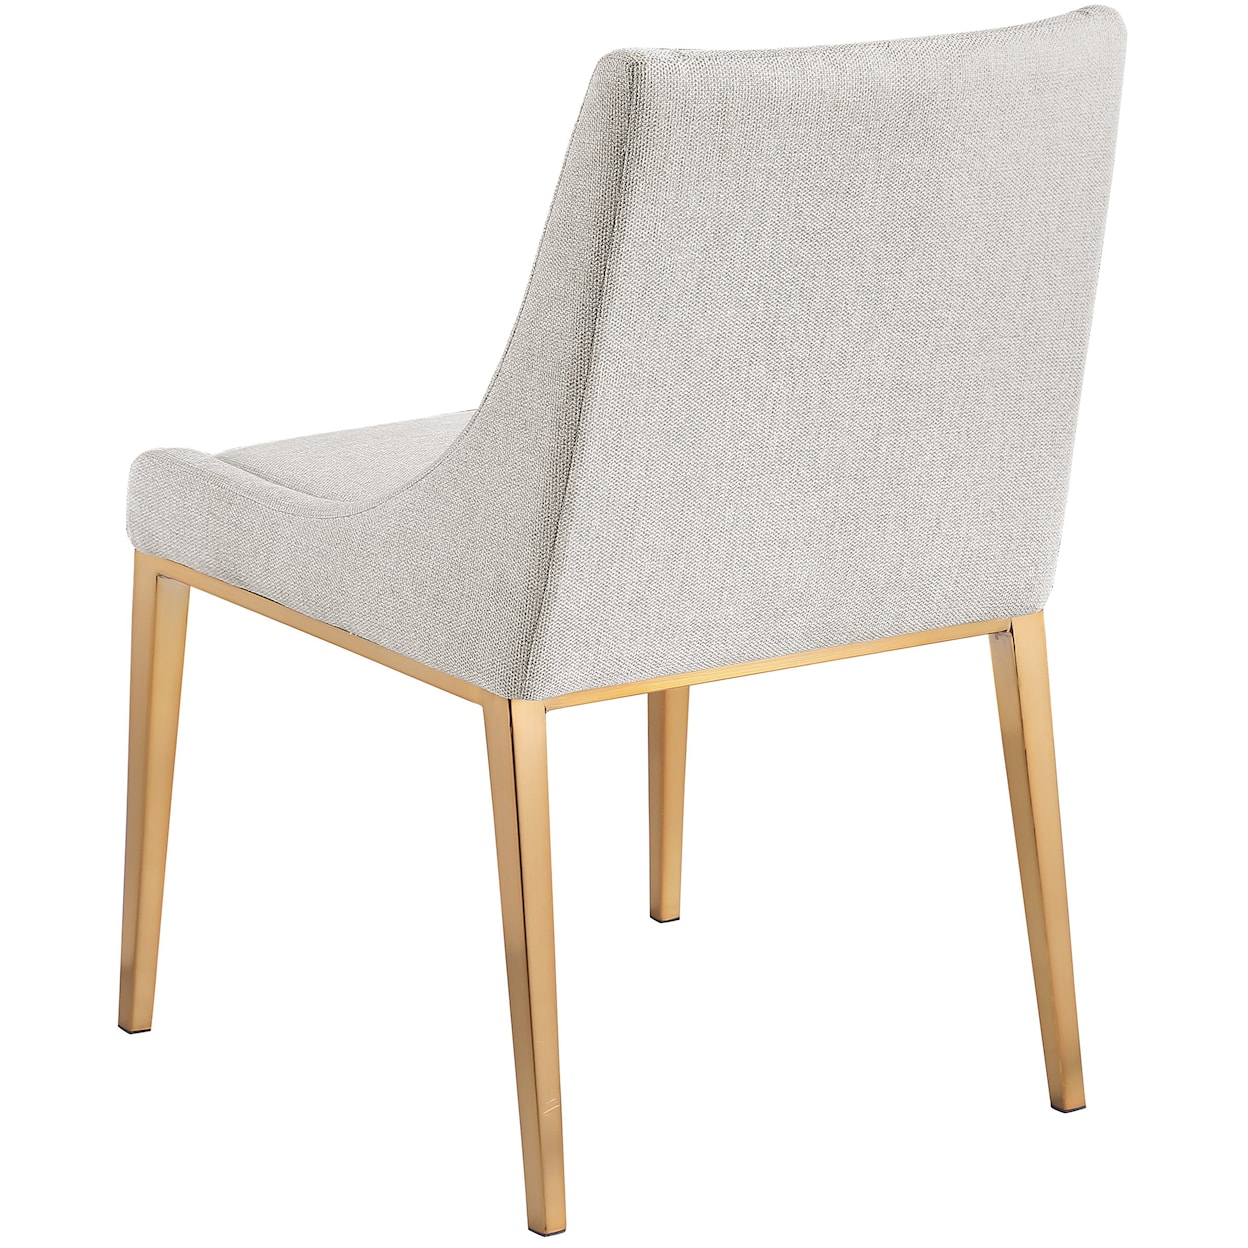 Meridian Furniture Haines Dining Chair